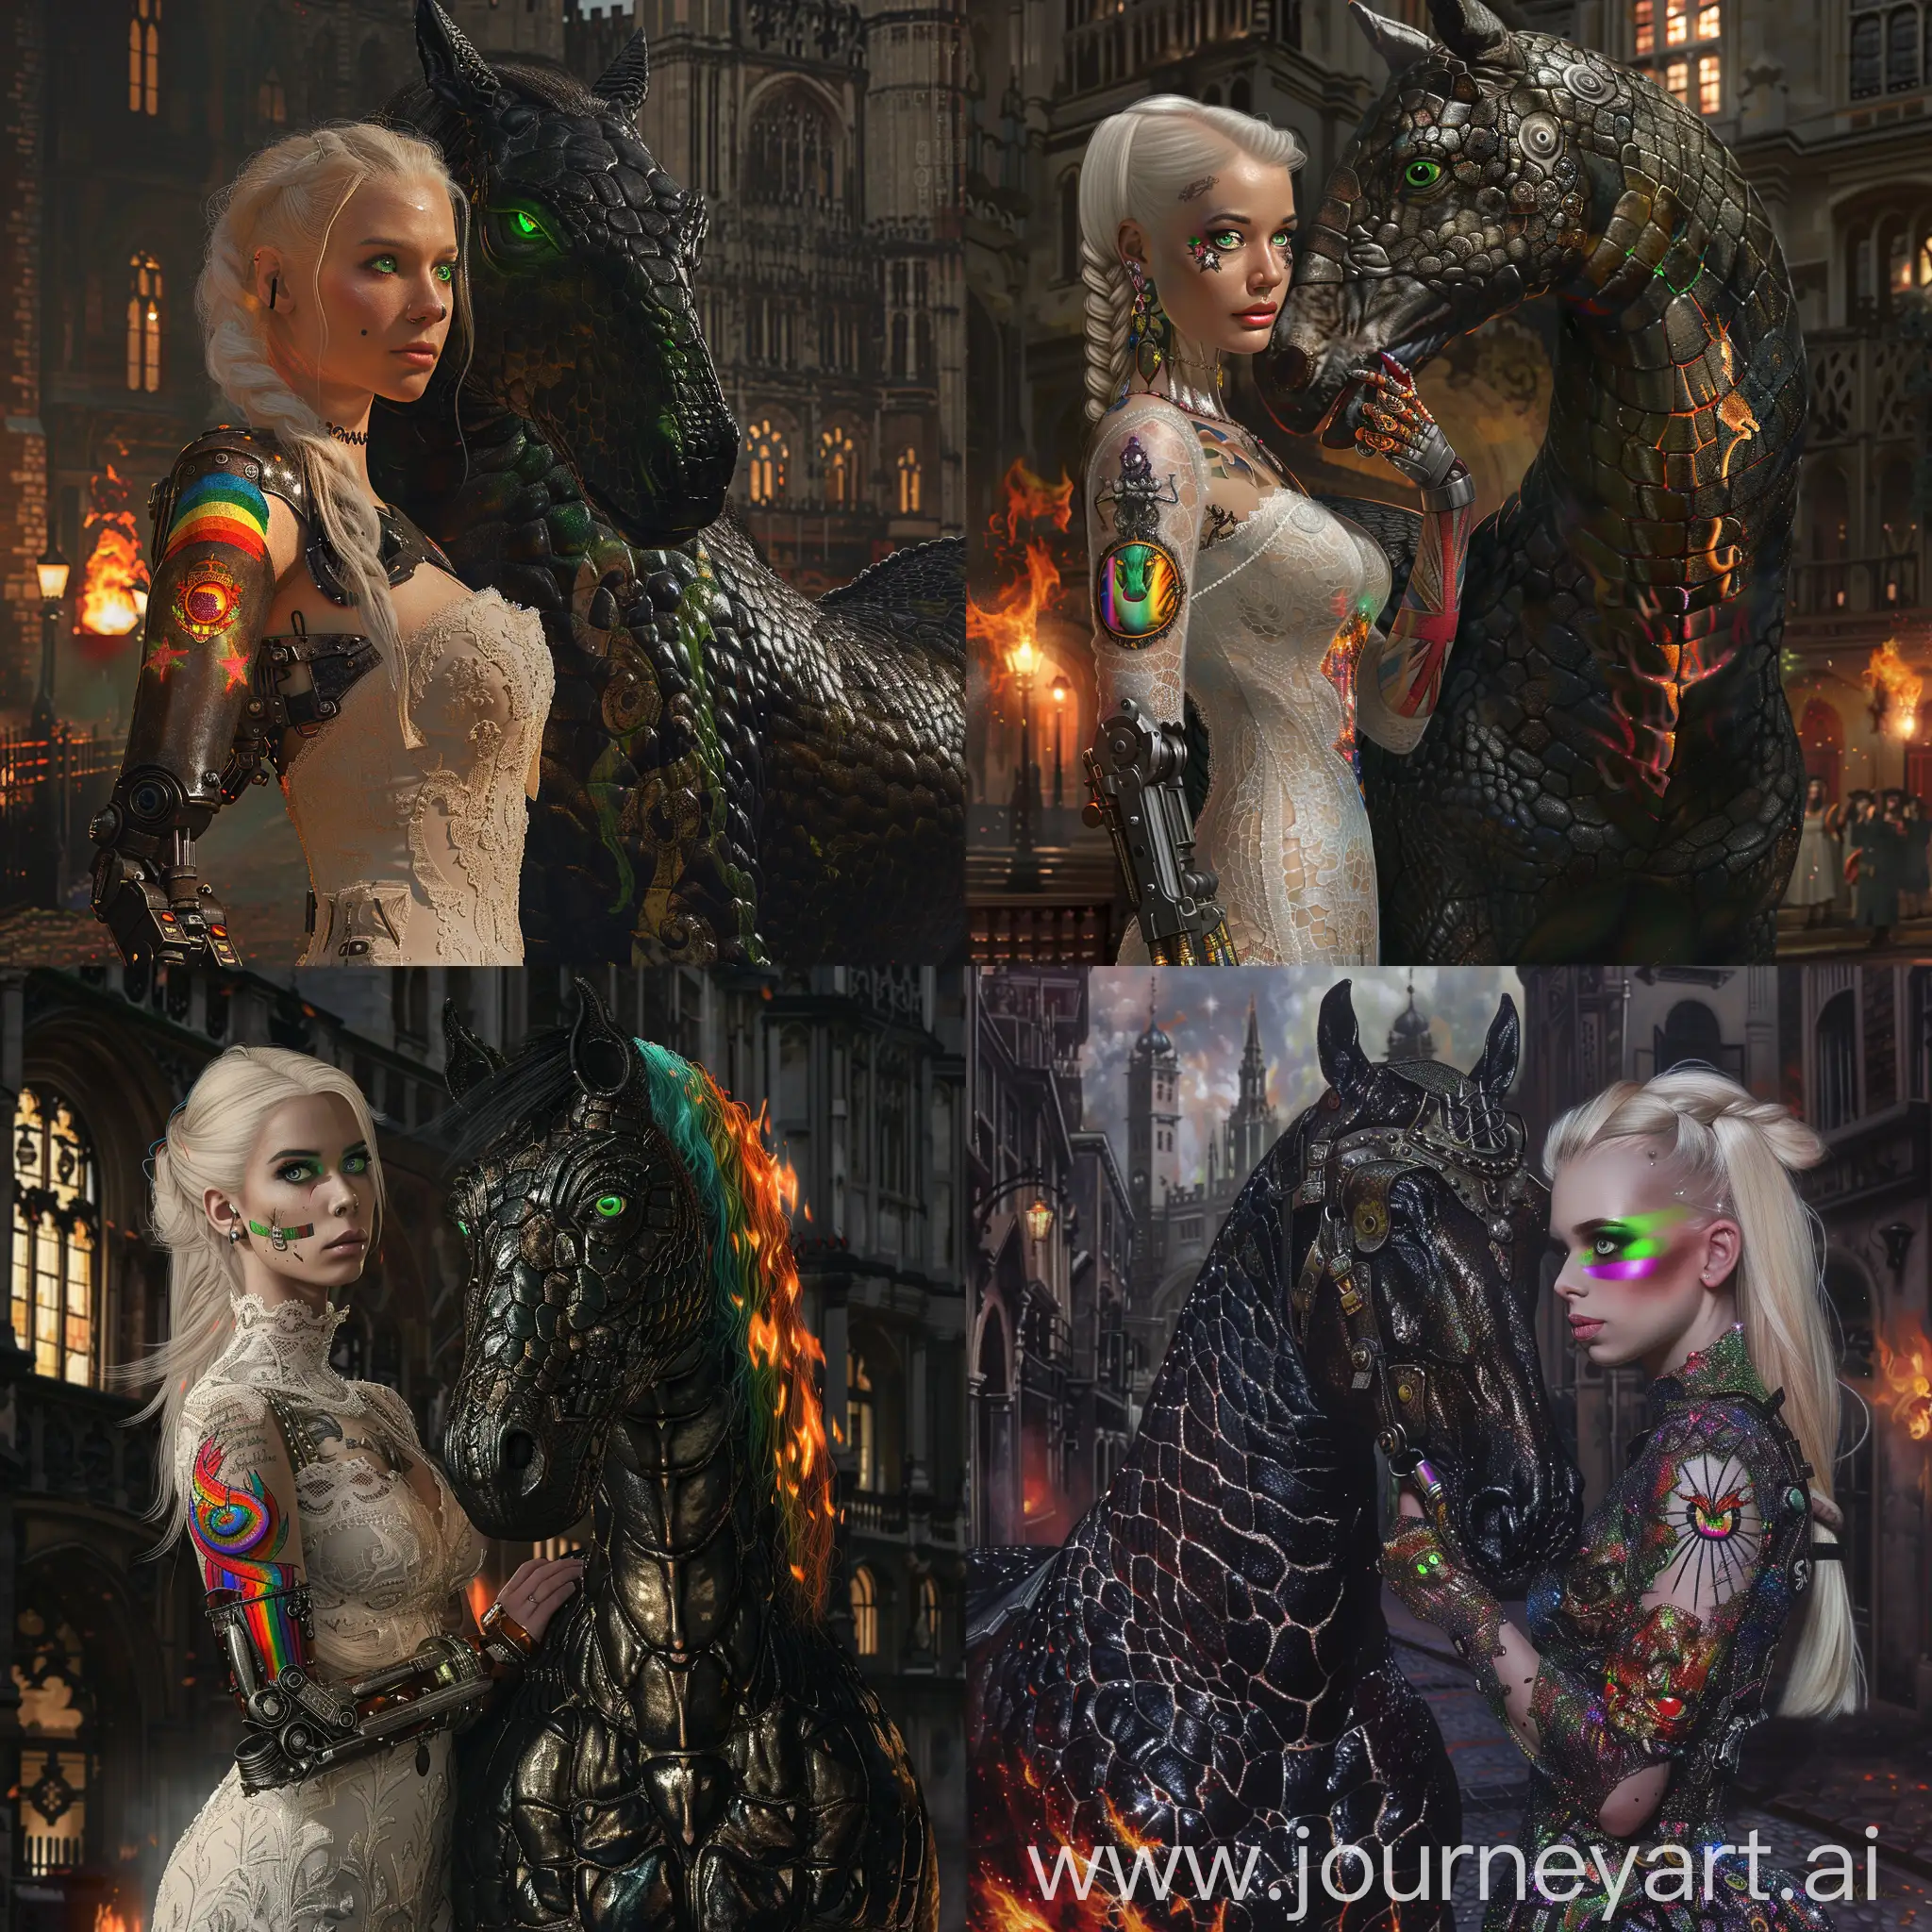 Blonde-Woman-with-Mechanical-Hand-beside-IridescentBlack-Horse-in-Gothic-London-Night